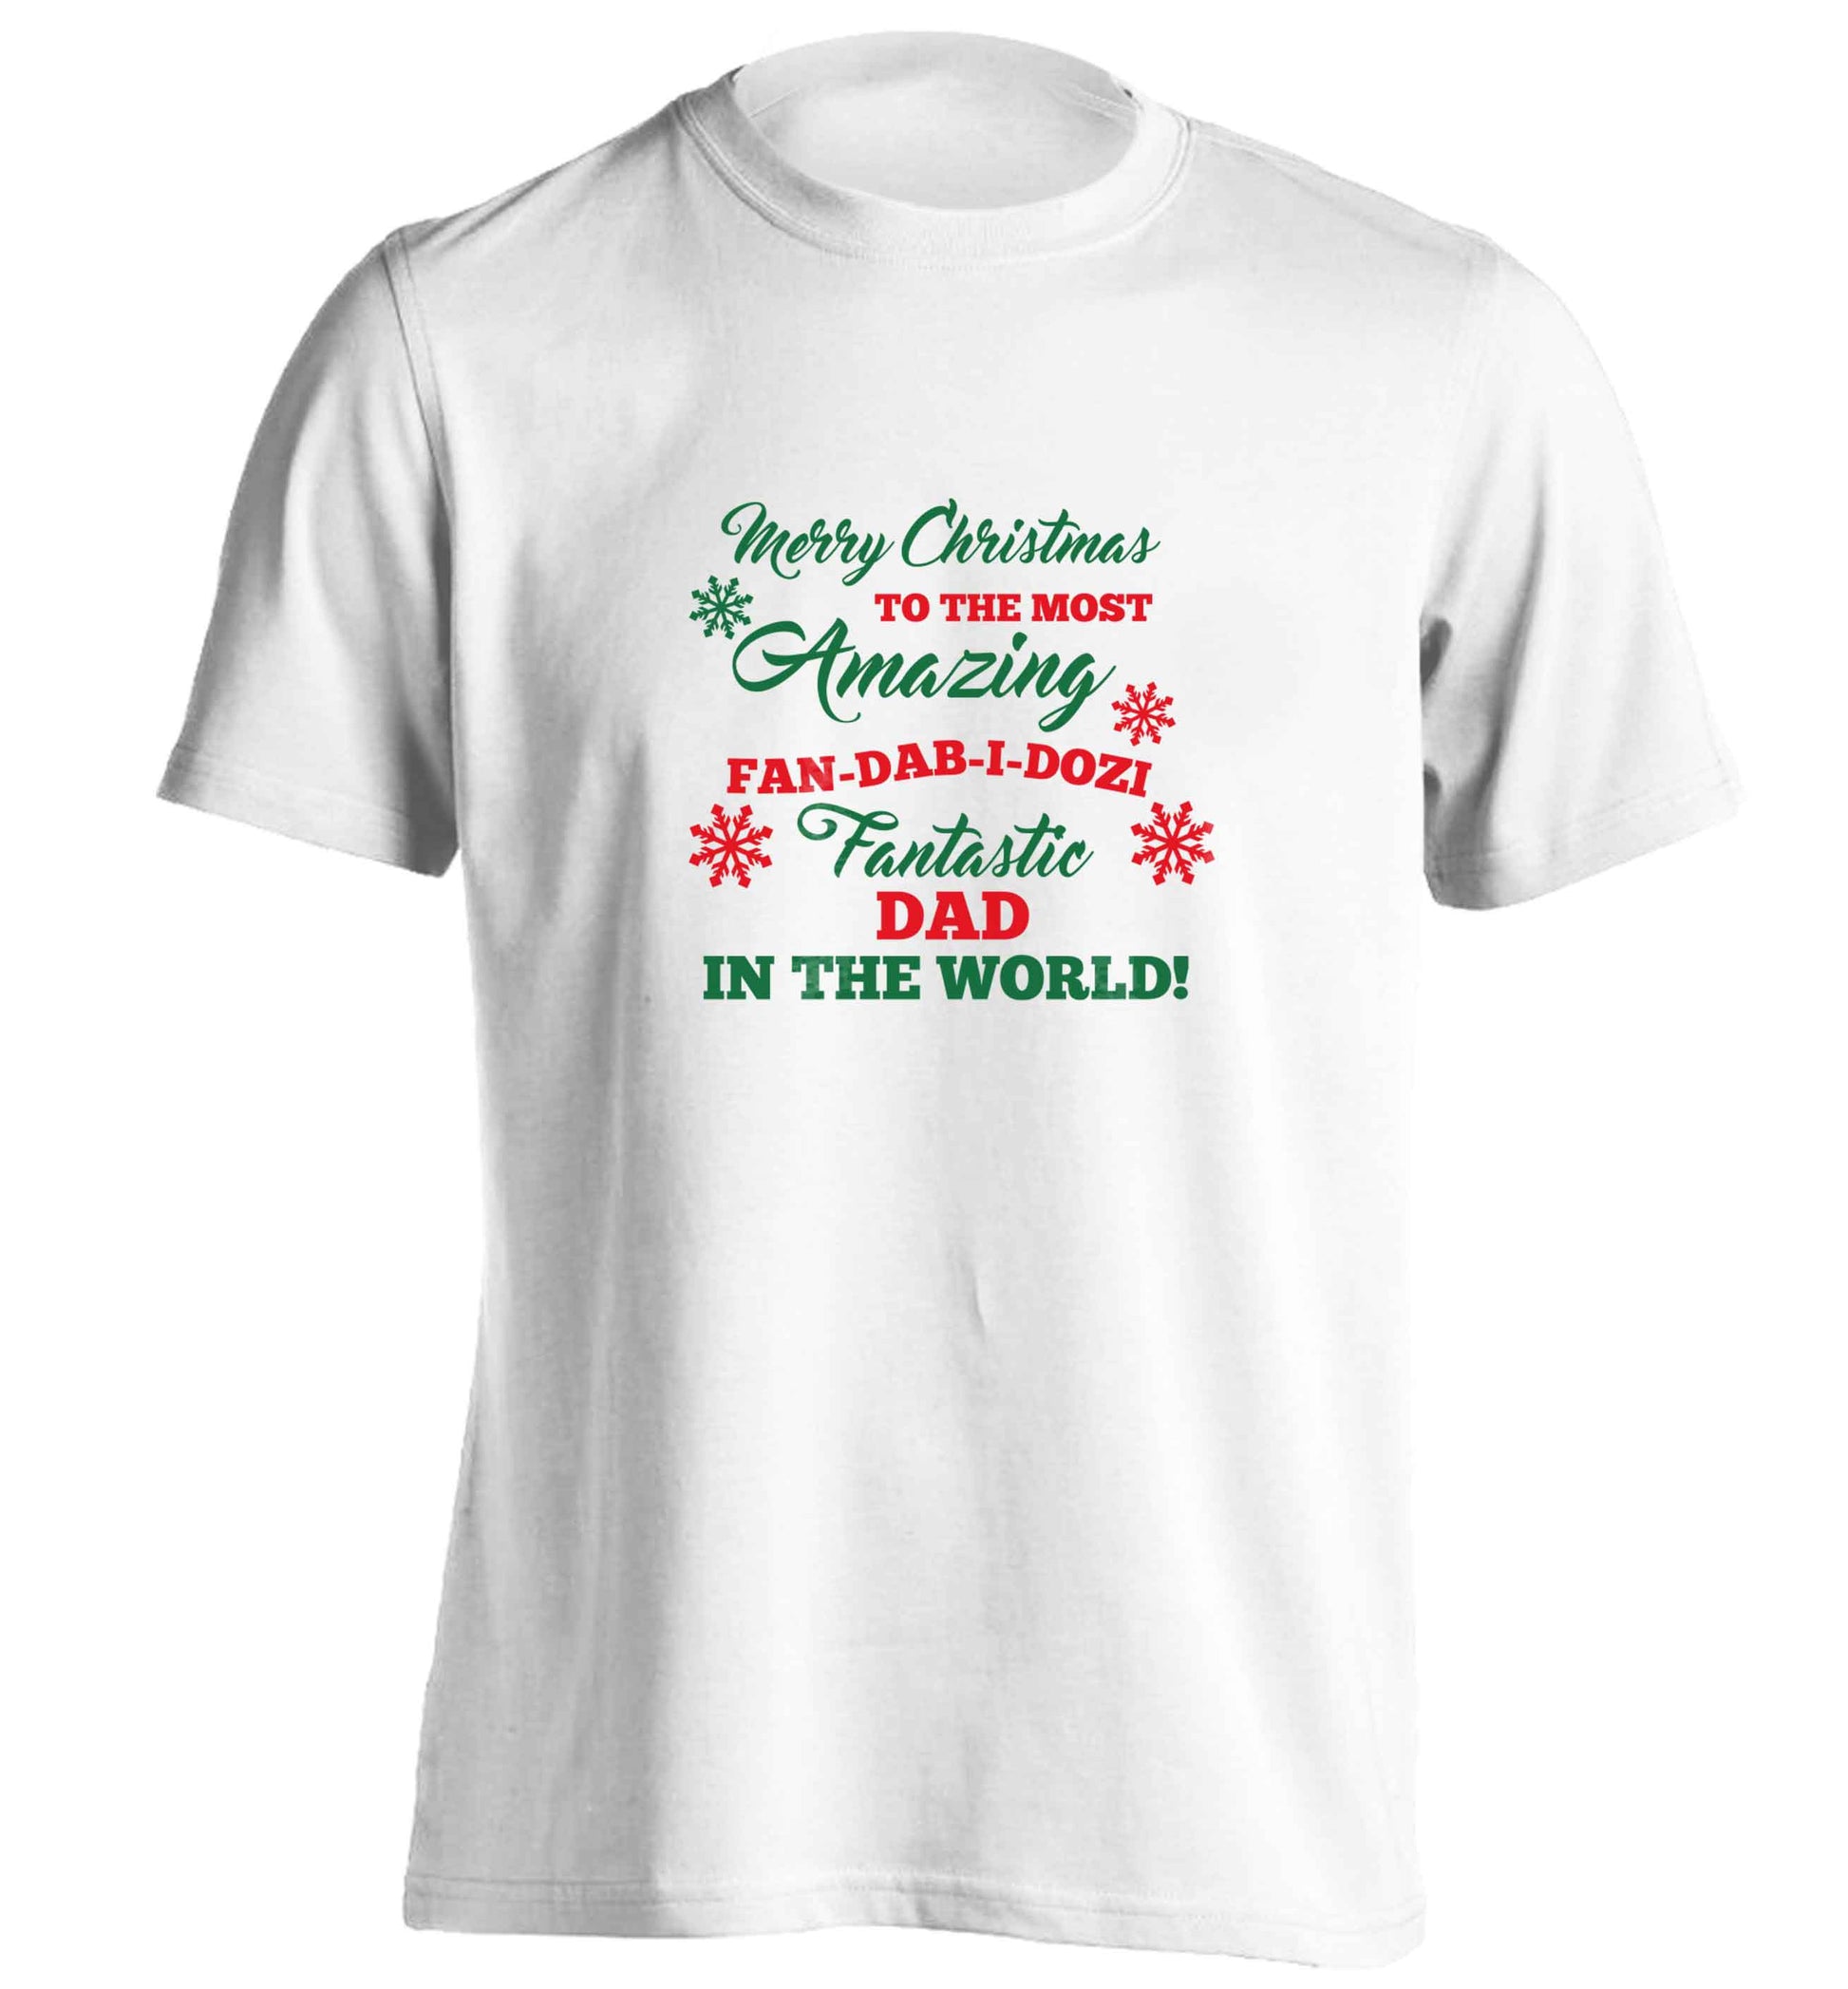 Merry Christmas to the most amazing fan-dab-i-dozi fantasic Dad in the world adults unisex white Tshirt 2XL